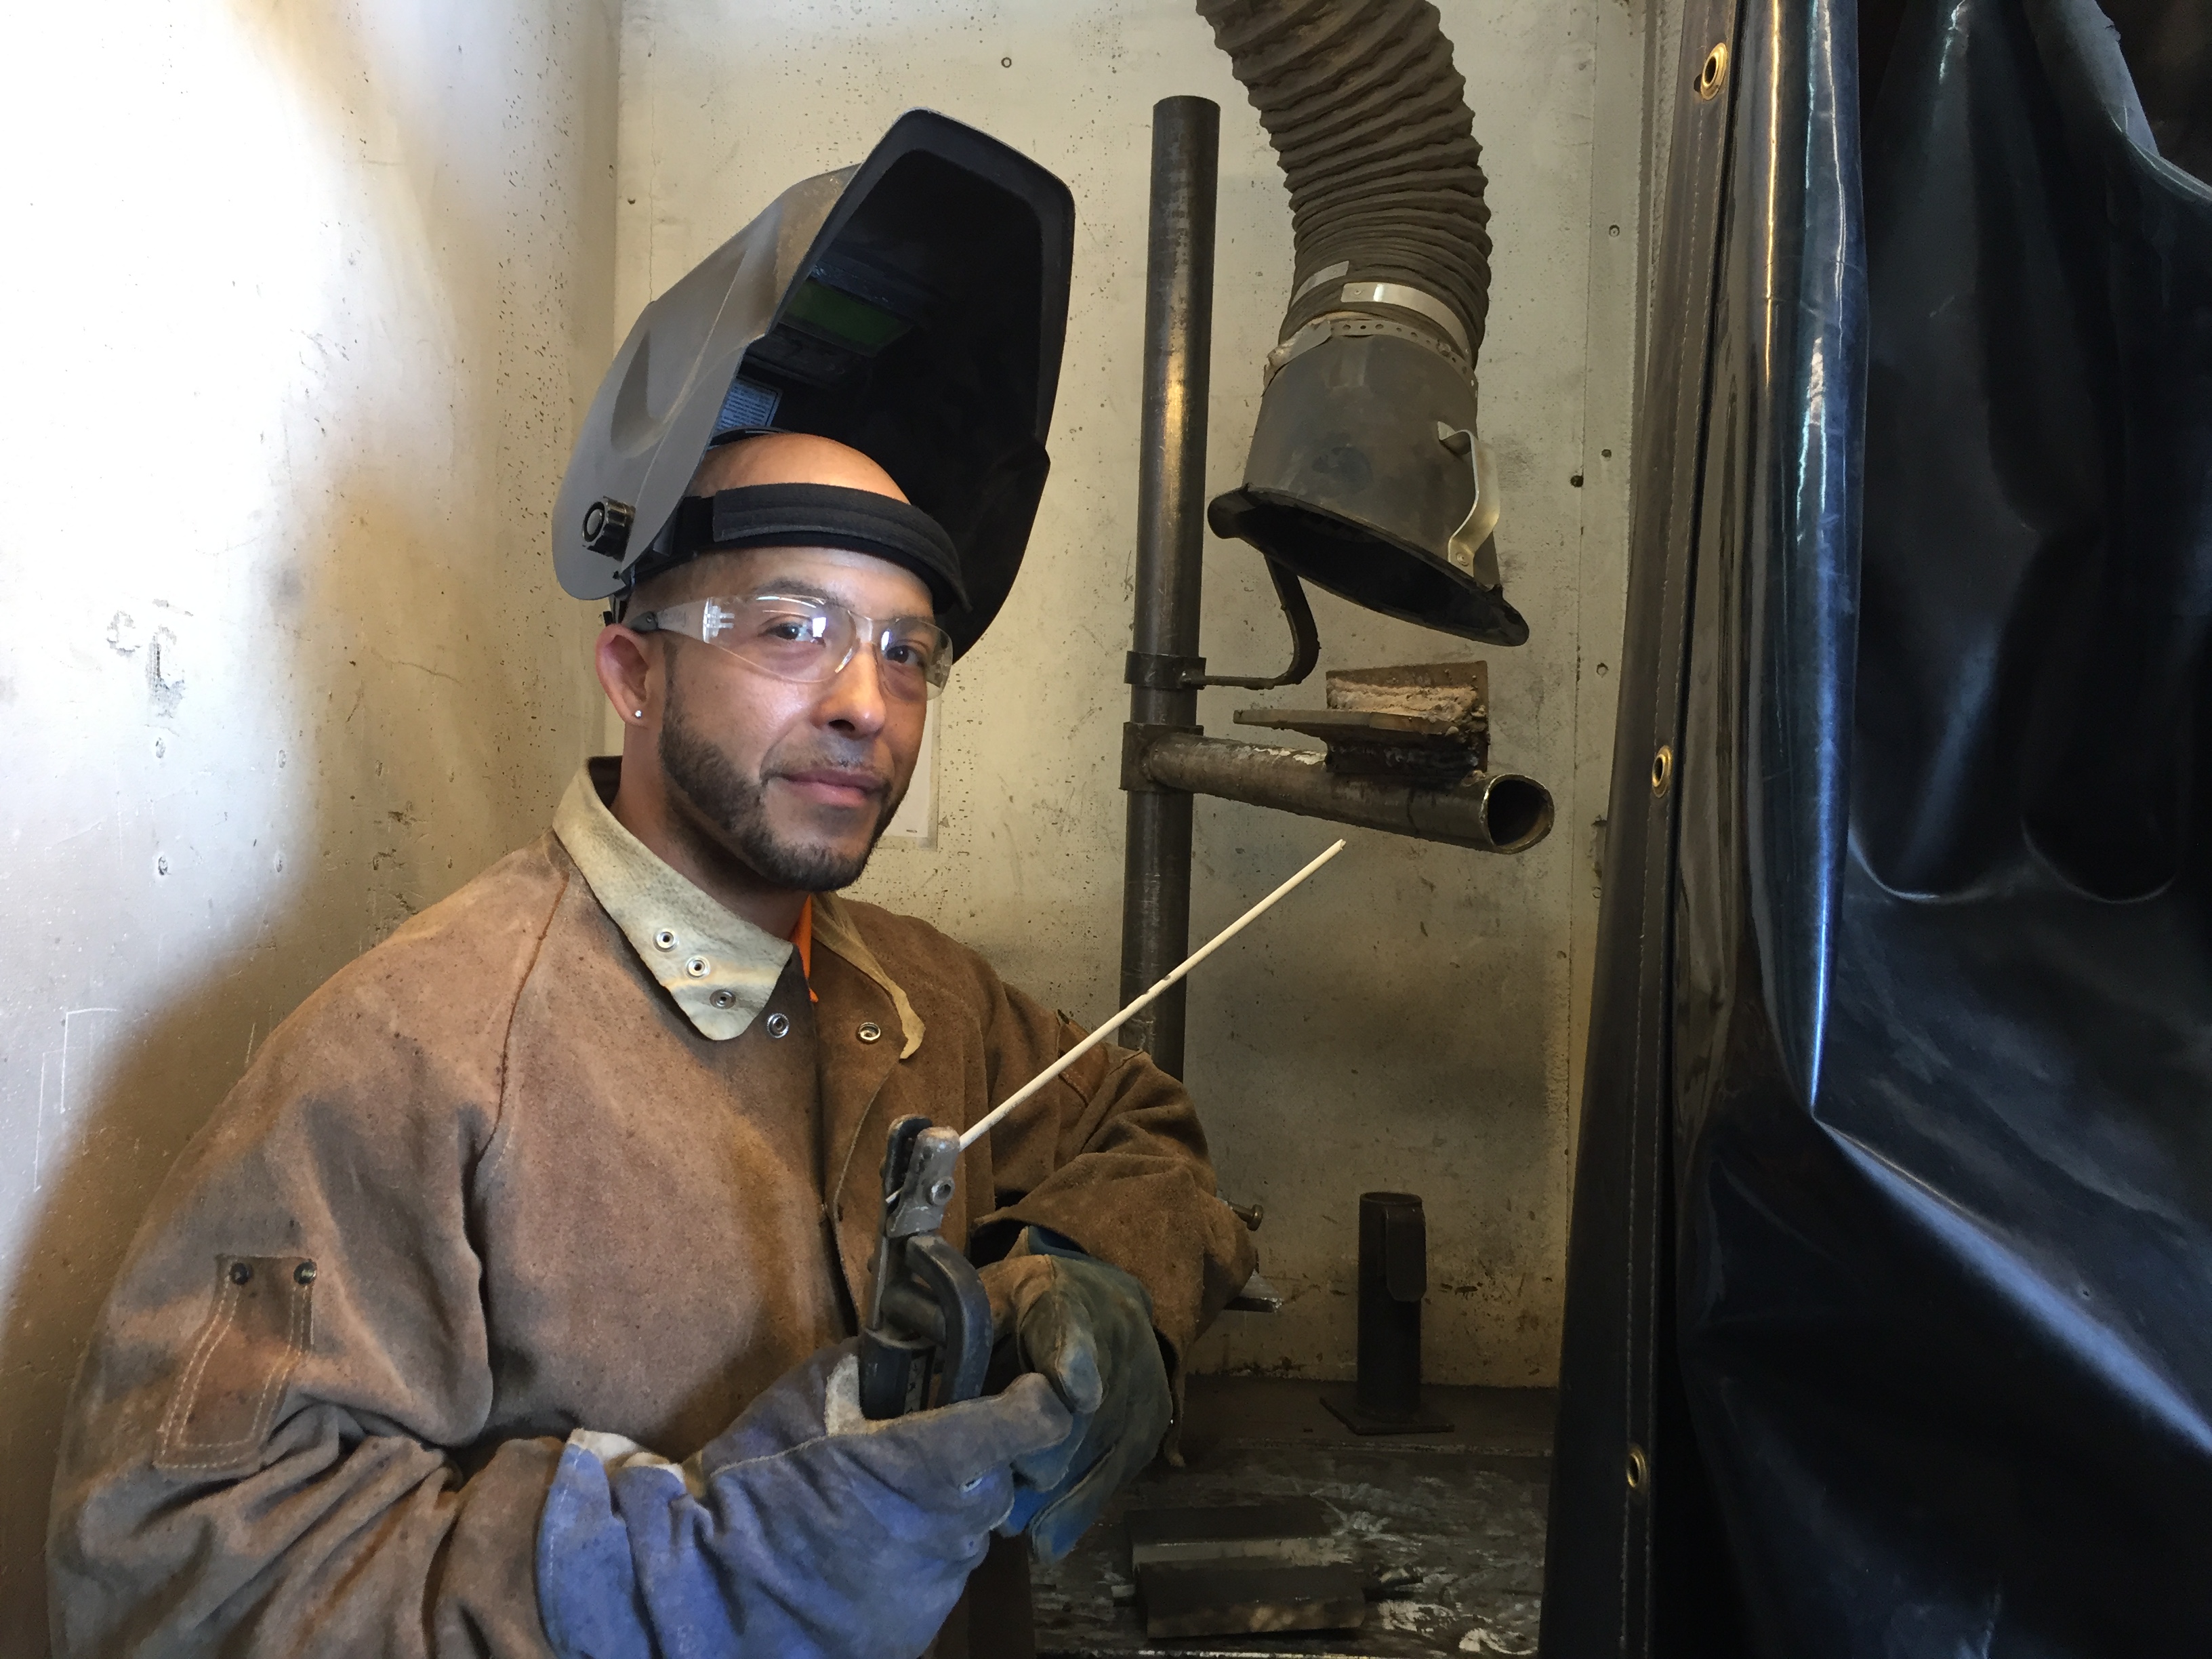 Rey Soto-Lopez practices his welding techniques at the Ironworkers Union. (Photo by Anne Hillman/Alaska Public Media)